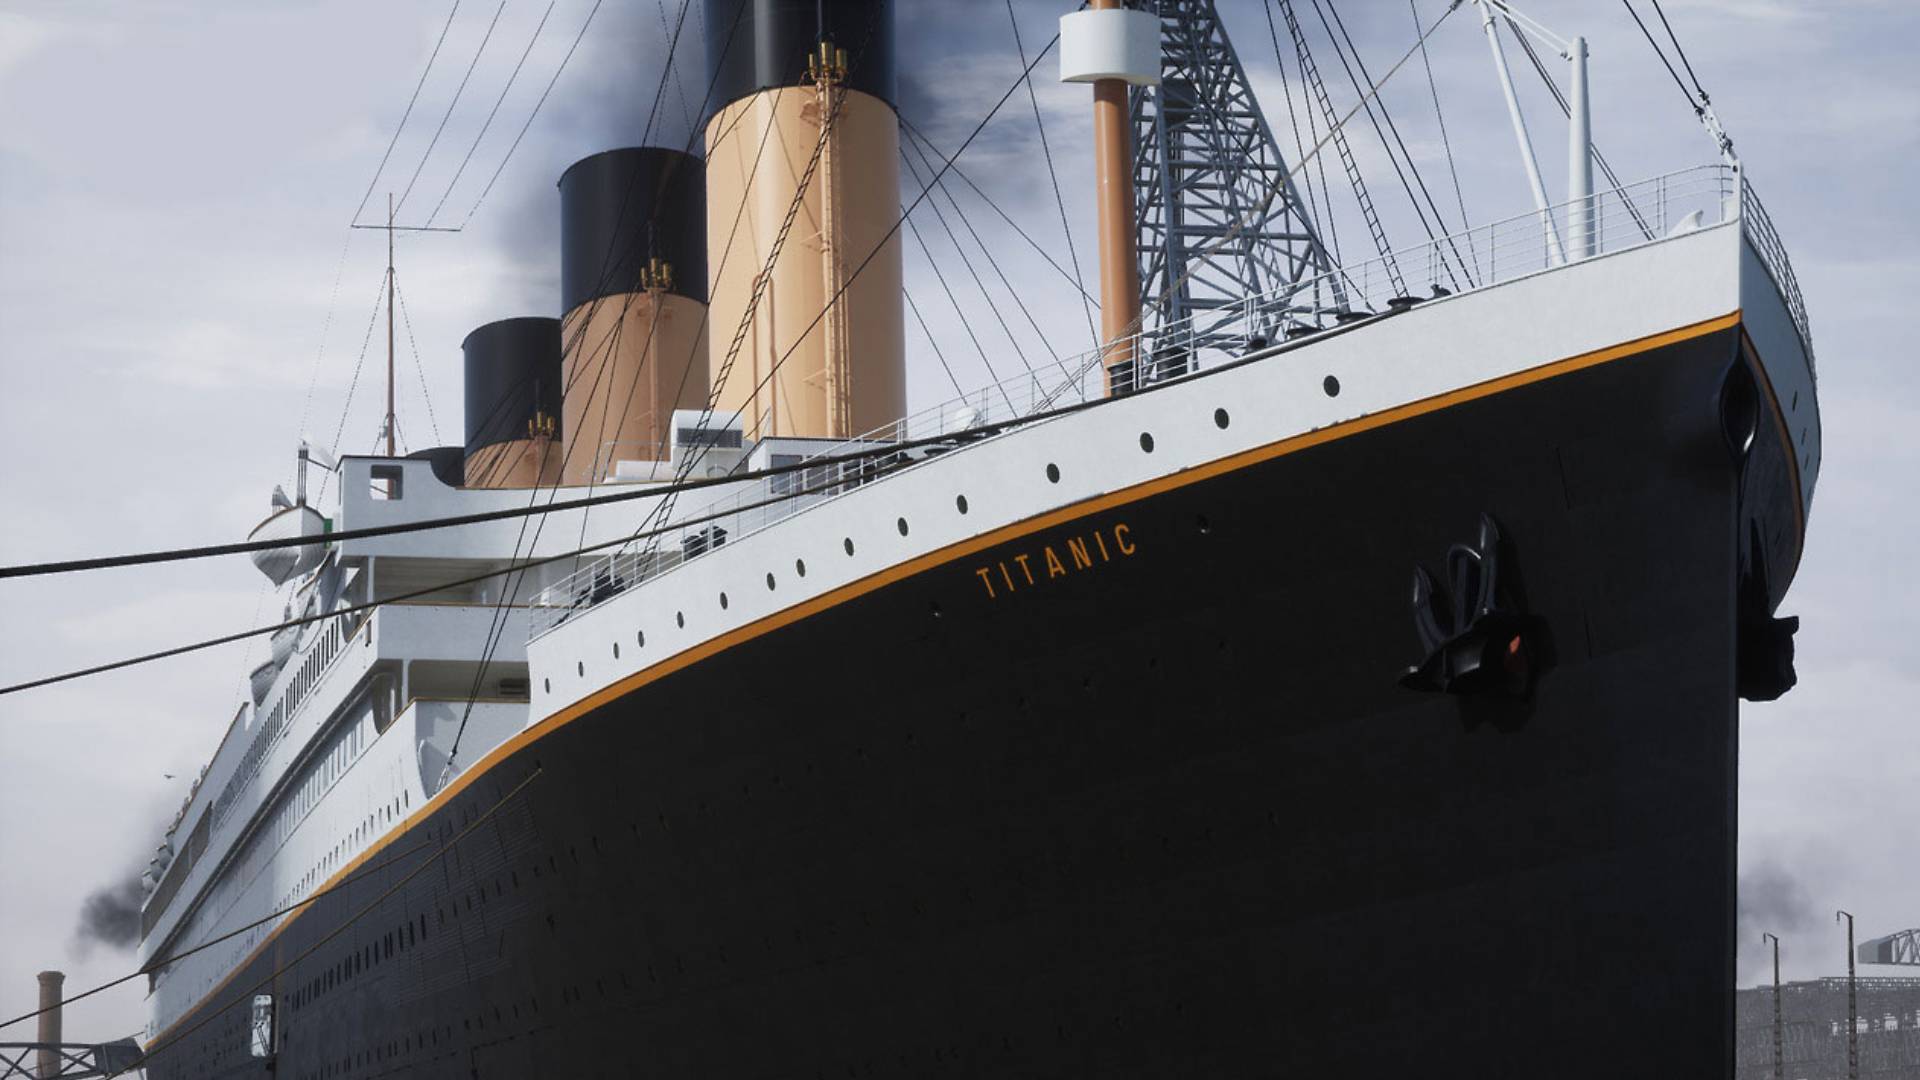 I've become obsessed with a simulation of the Titanic | TechRadar